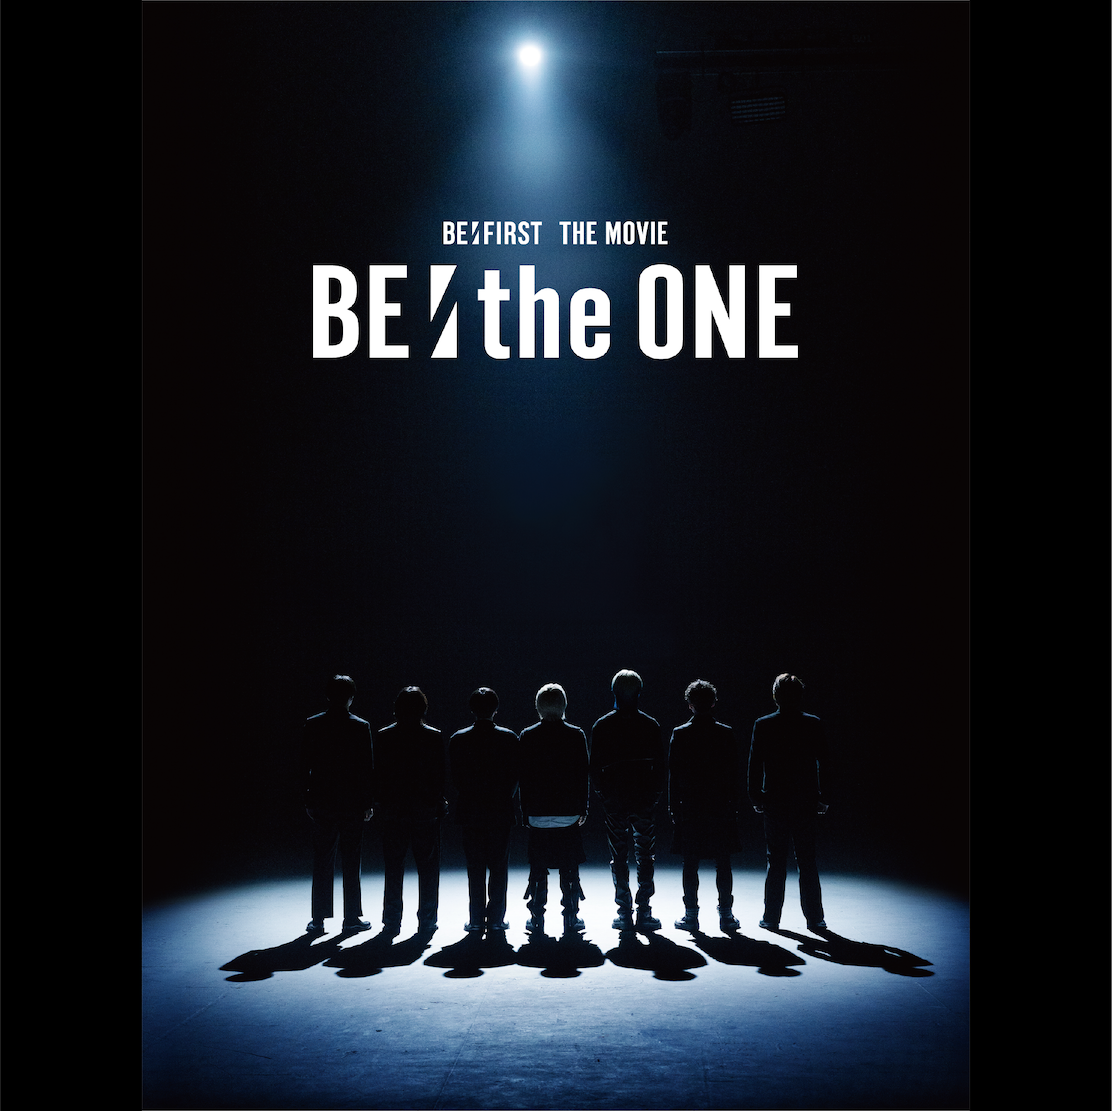 BE:FIRST THE MOVIE “BE the ONE”